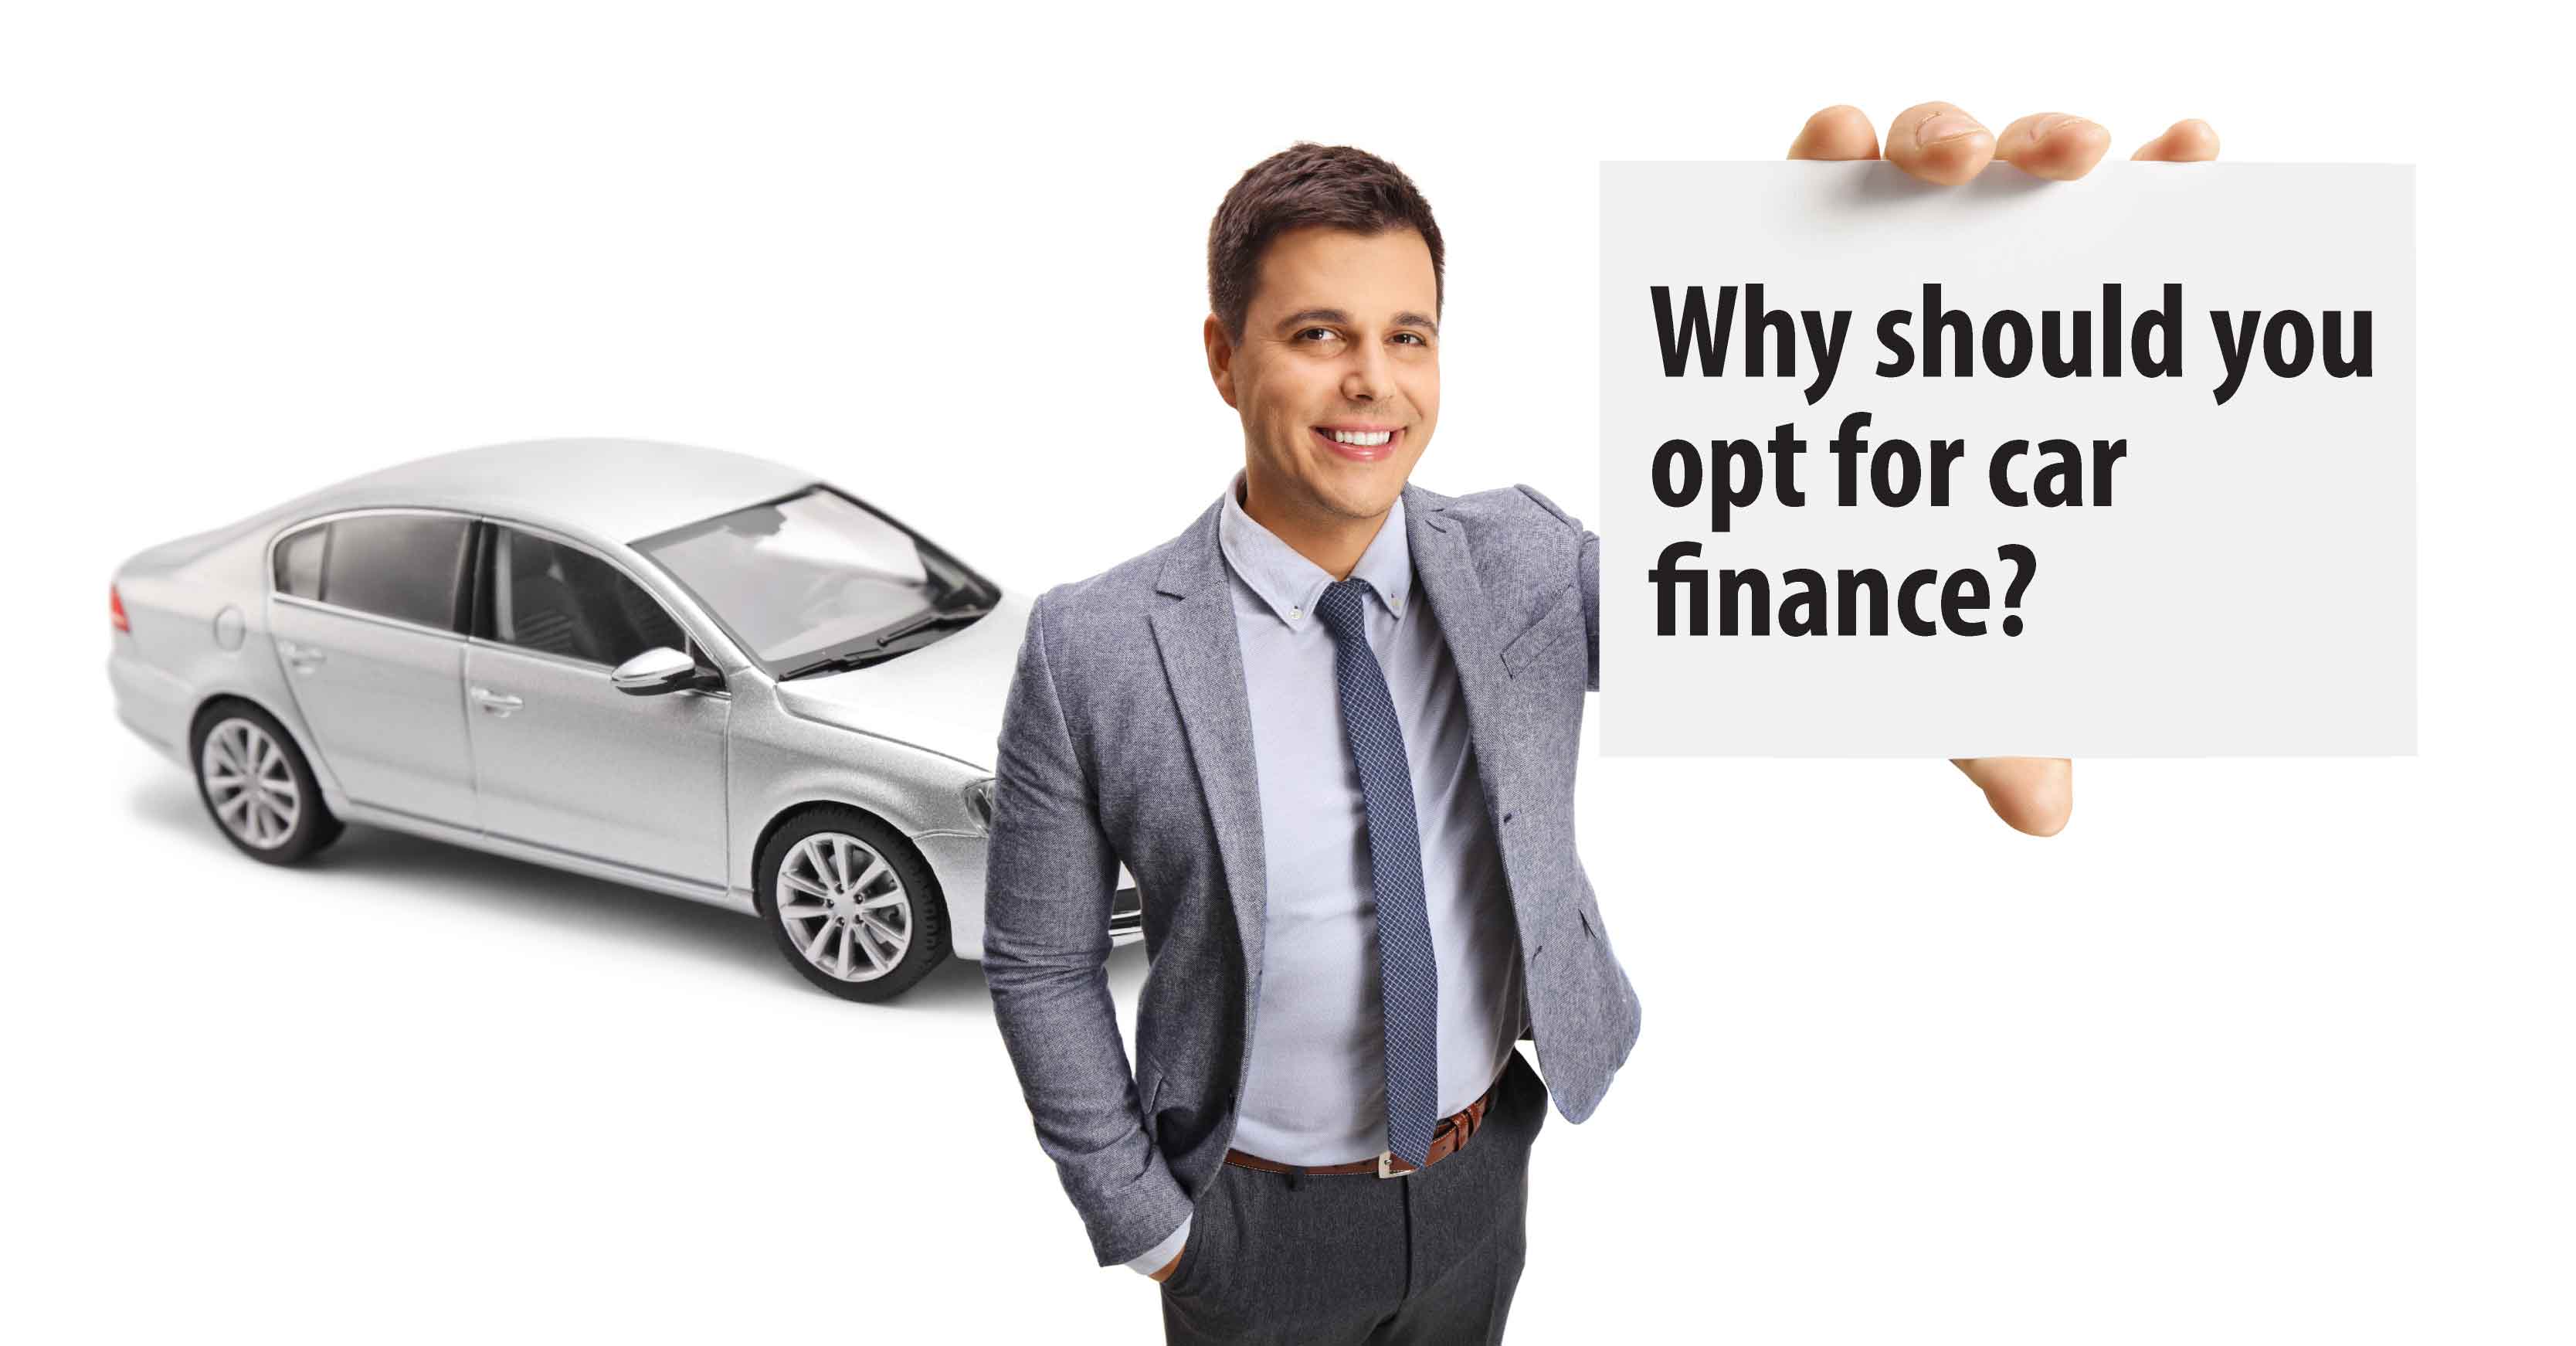 Why should you opt for car finance?